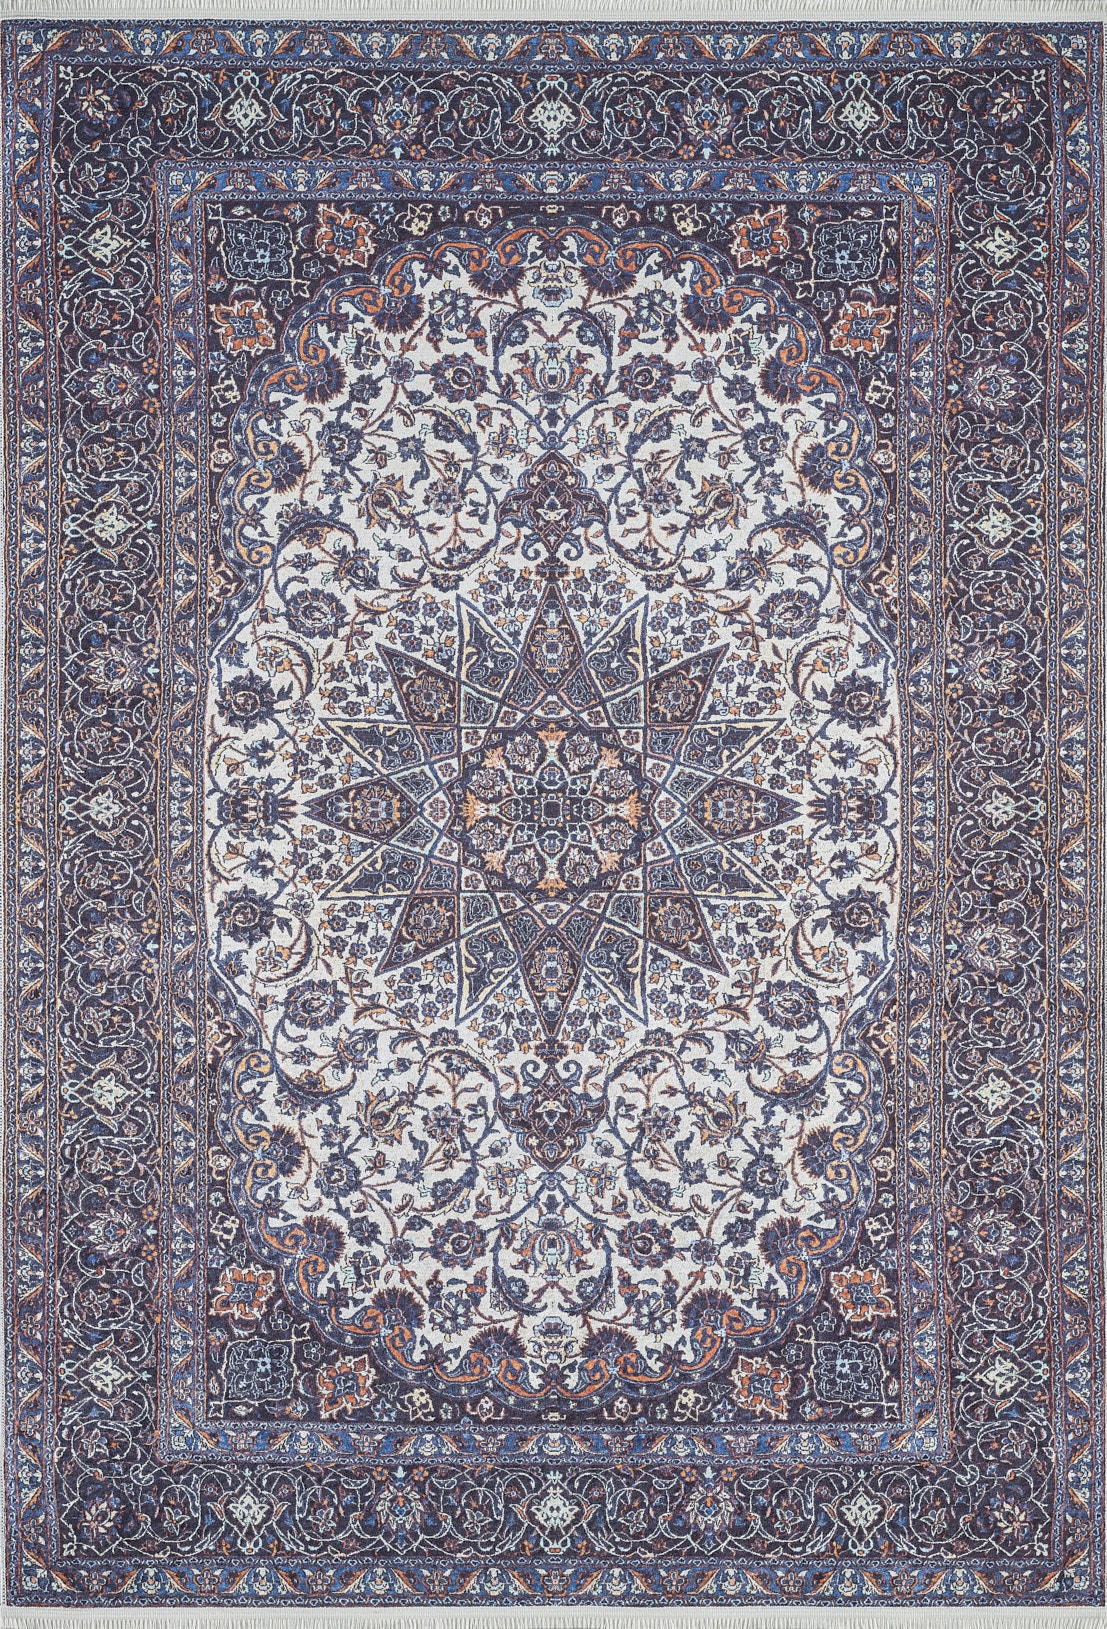 machine-washable-area-rug-Medallion-Persian-Collection-Blue-Gray-Anthracite-JR1687